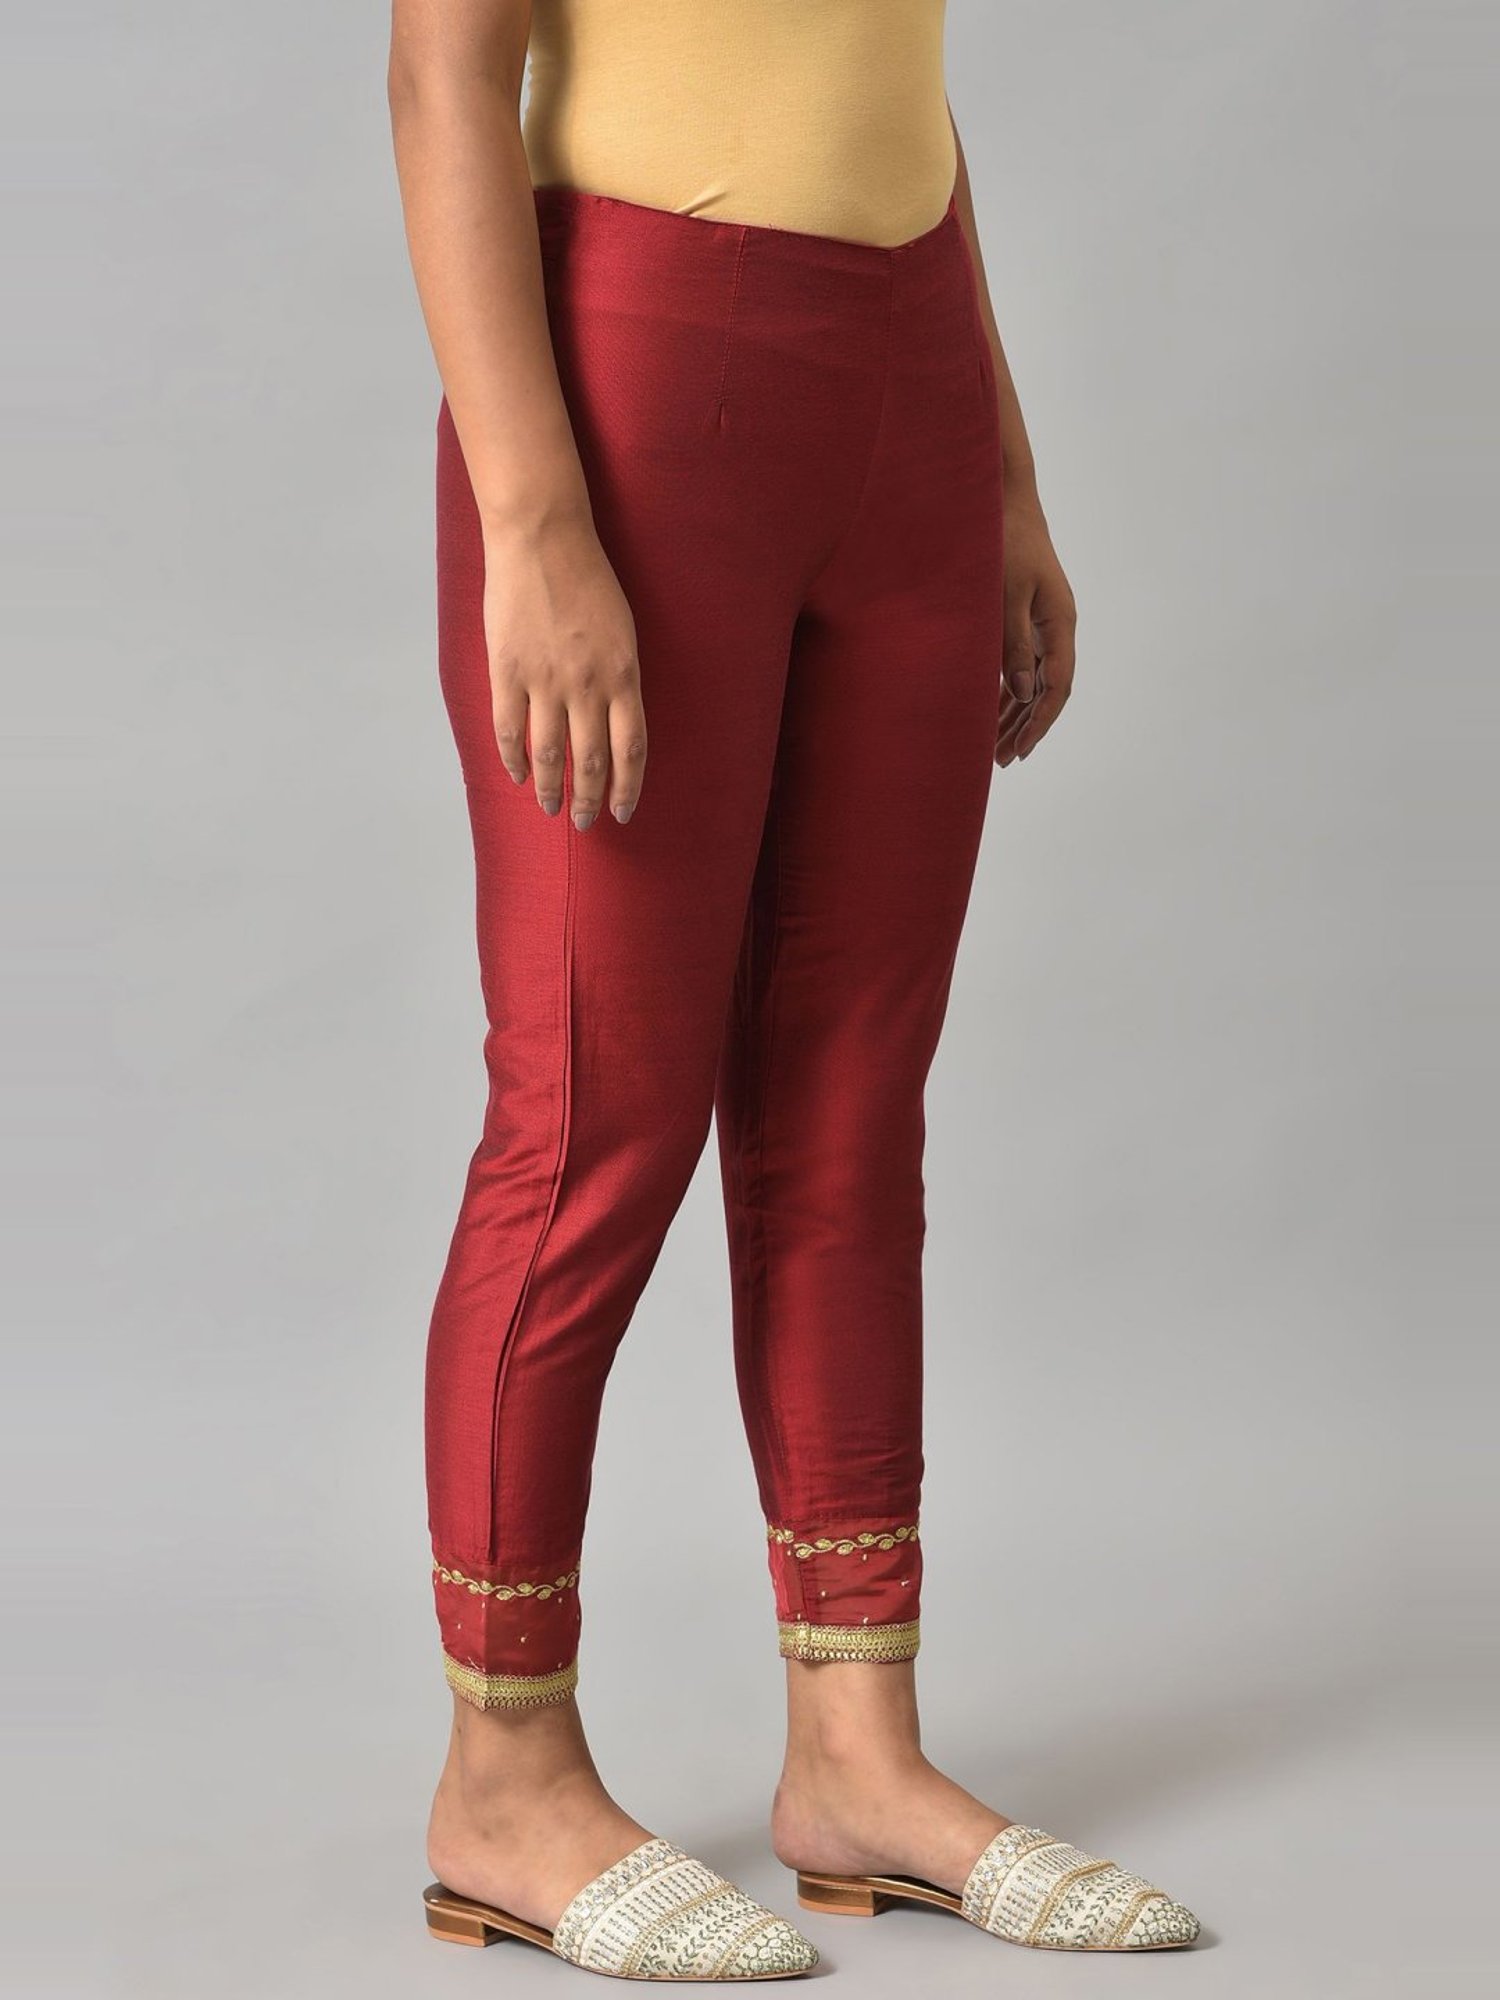 Cotton Regular Fit Red Designer Ladies Lace Pant, 36 at Rs 499/piece in New  Delhi